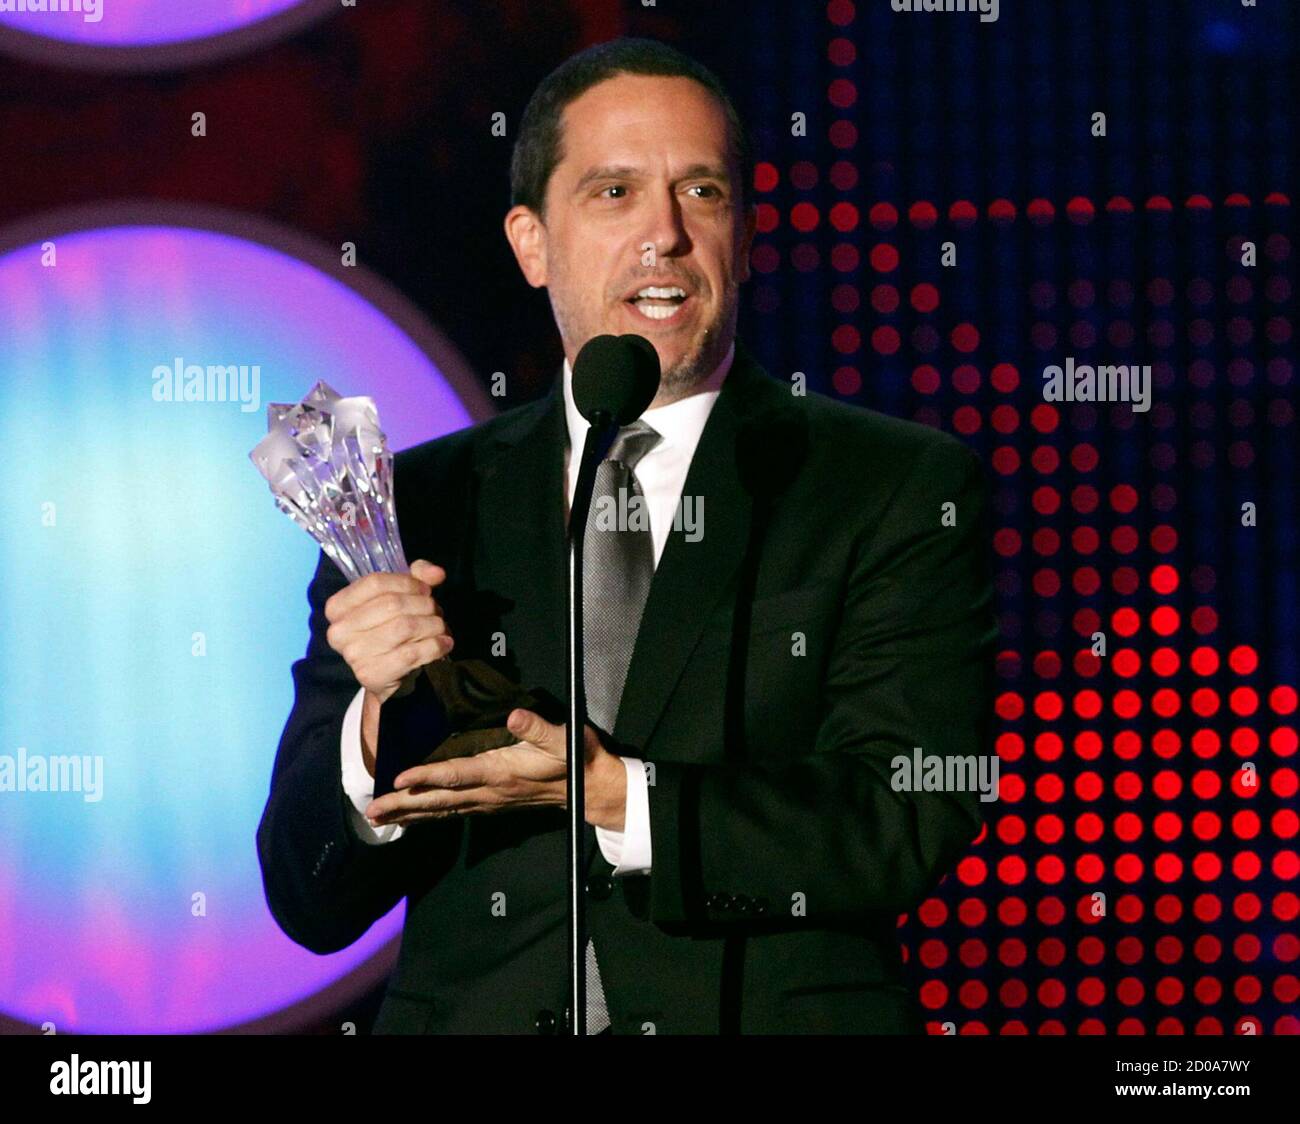 Director and writer Lee Unkrich accepts the award for best animated feature  for 'Toy Story 3' at the 16th Annual Critics' Choice Movie Awards in  Hollywood, California January 14, 2011. REUTERS/Mario Anzuoni (